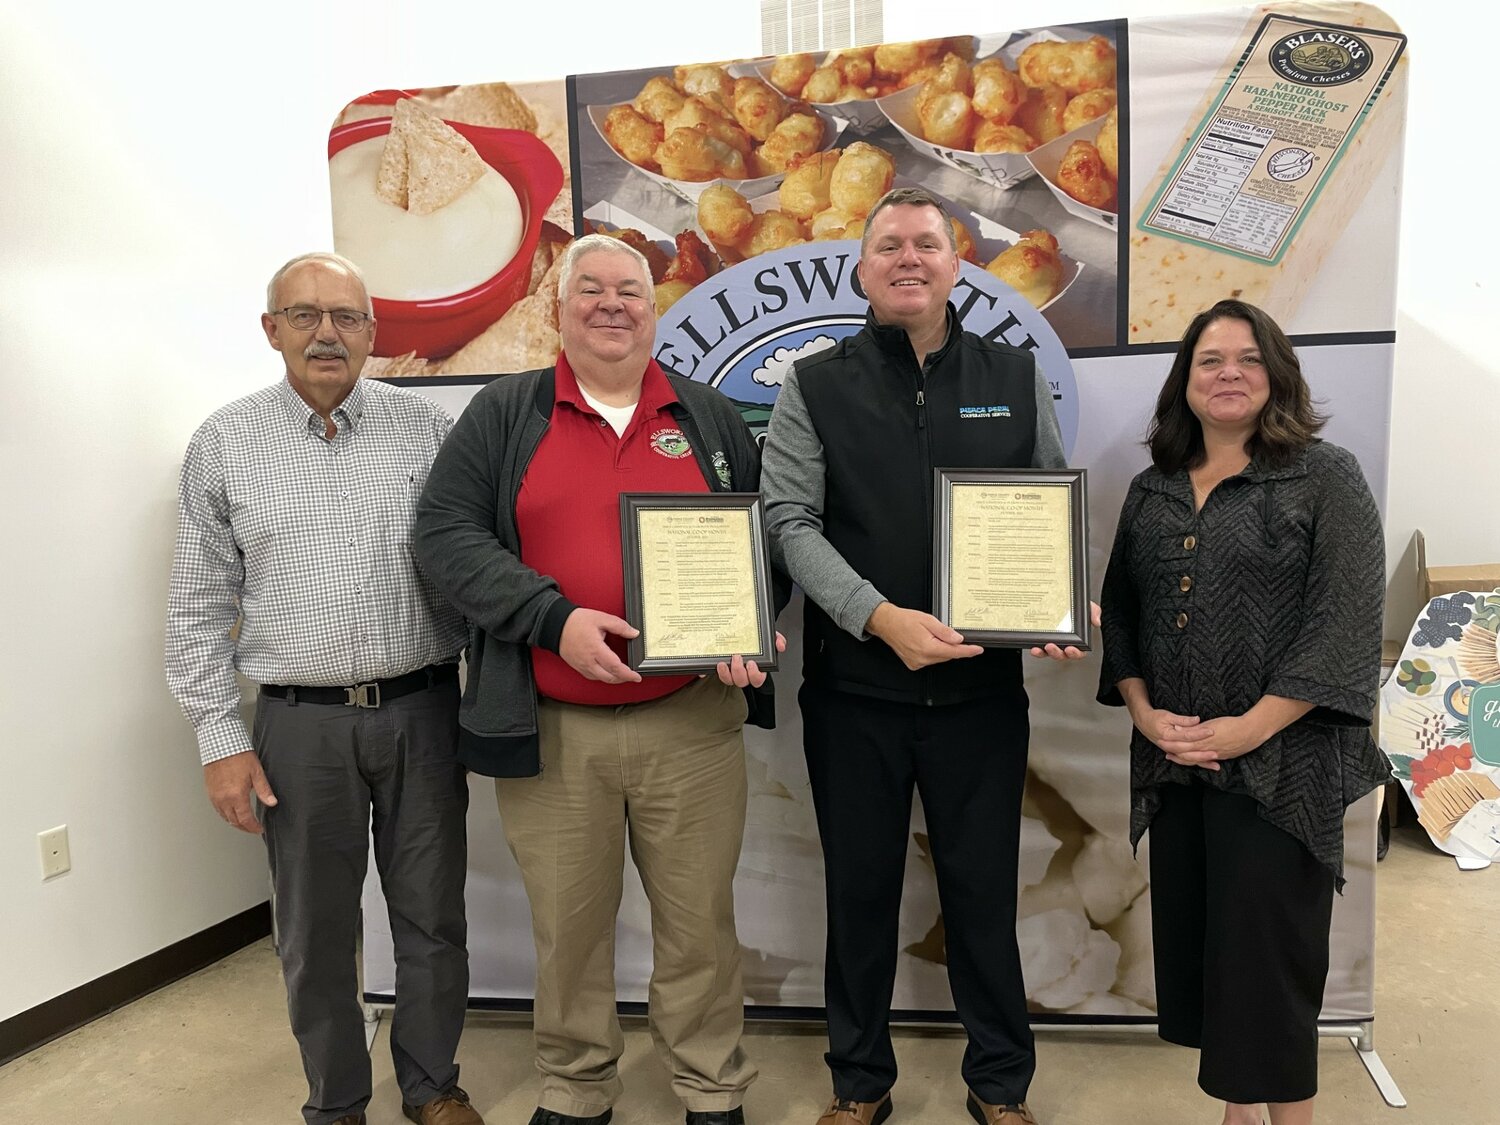 On Oct. 24, Pierce County Executive Director Joe Folsom (left) and St. Croix EDC President Krista Paulus (right) presented proclamations to Ellsworth Cooperative Creamery CEO Paul Bauer (second from left) and Nate Boettcher of Pierce Pepin Cooperative Service (third from left) for National Cooperative Month.